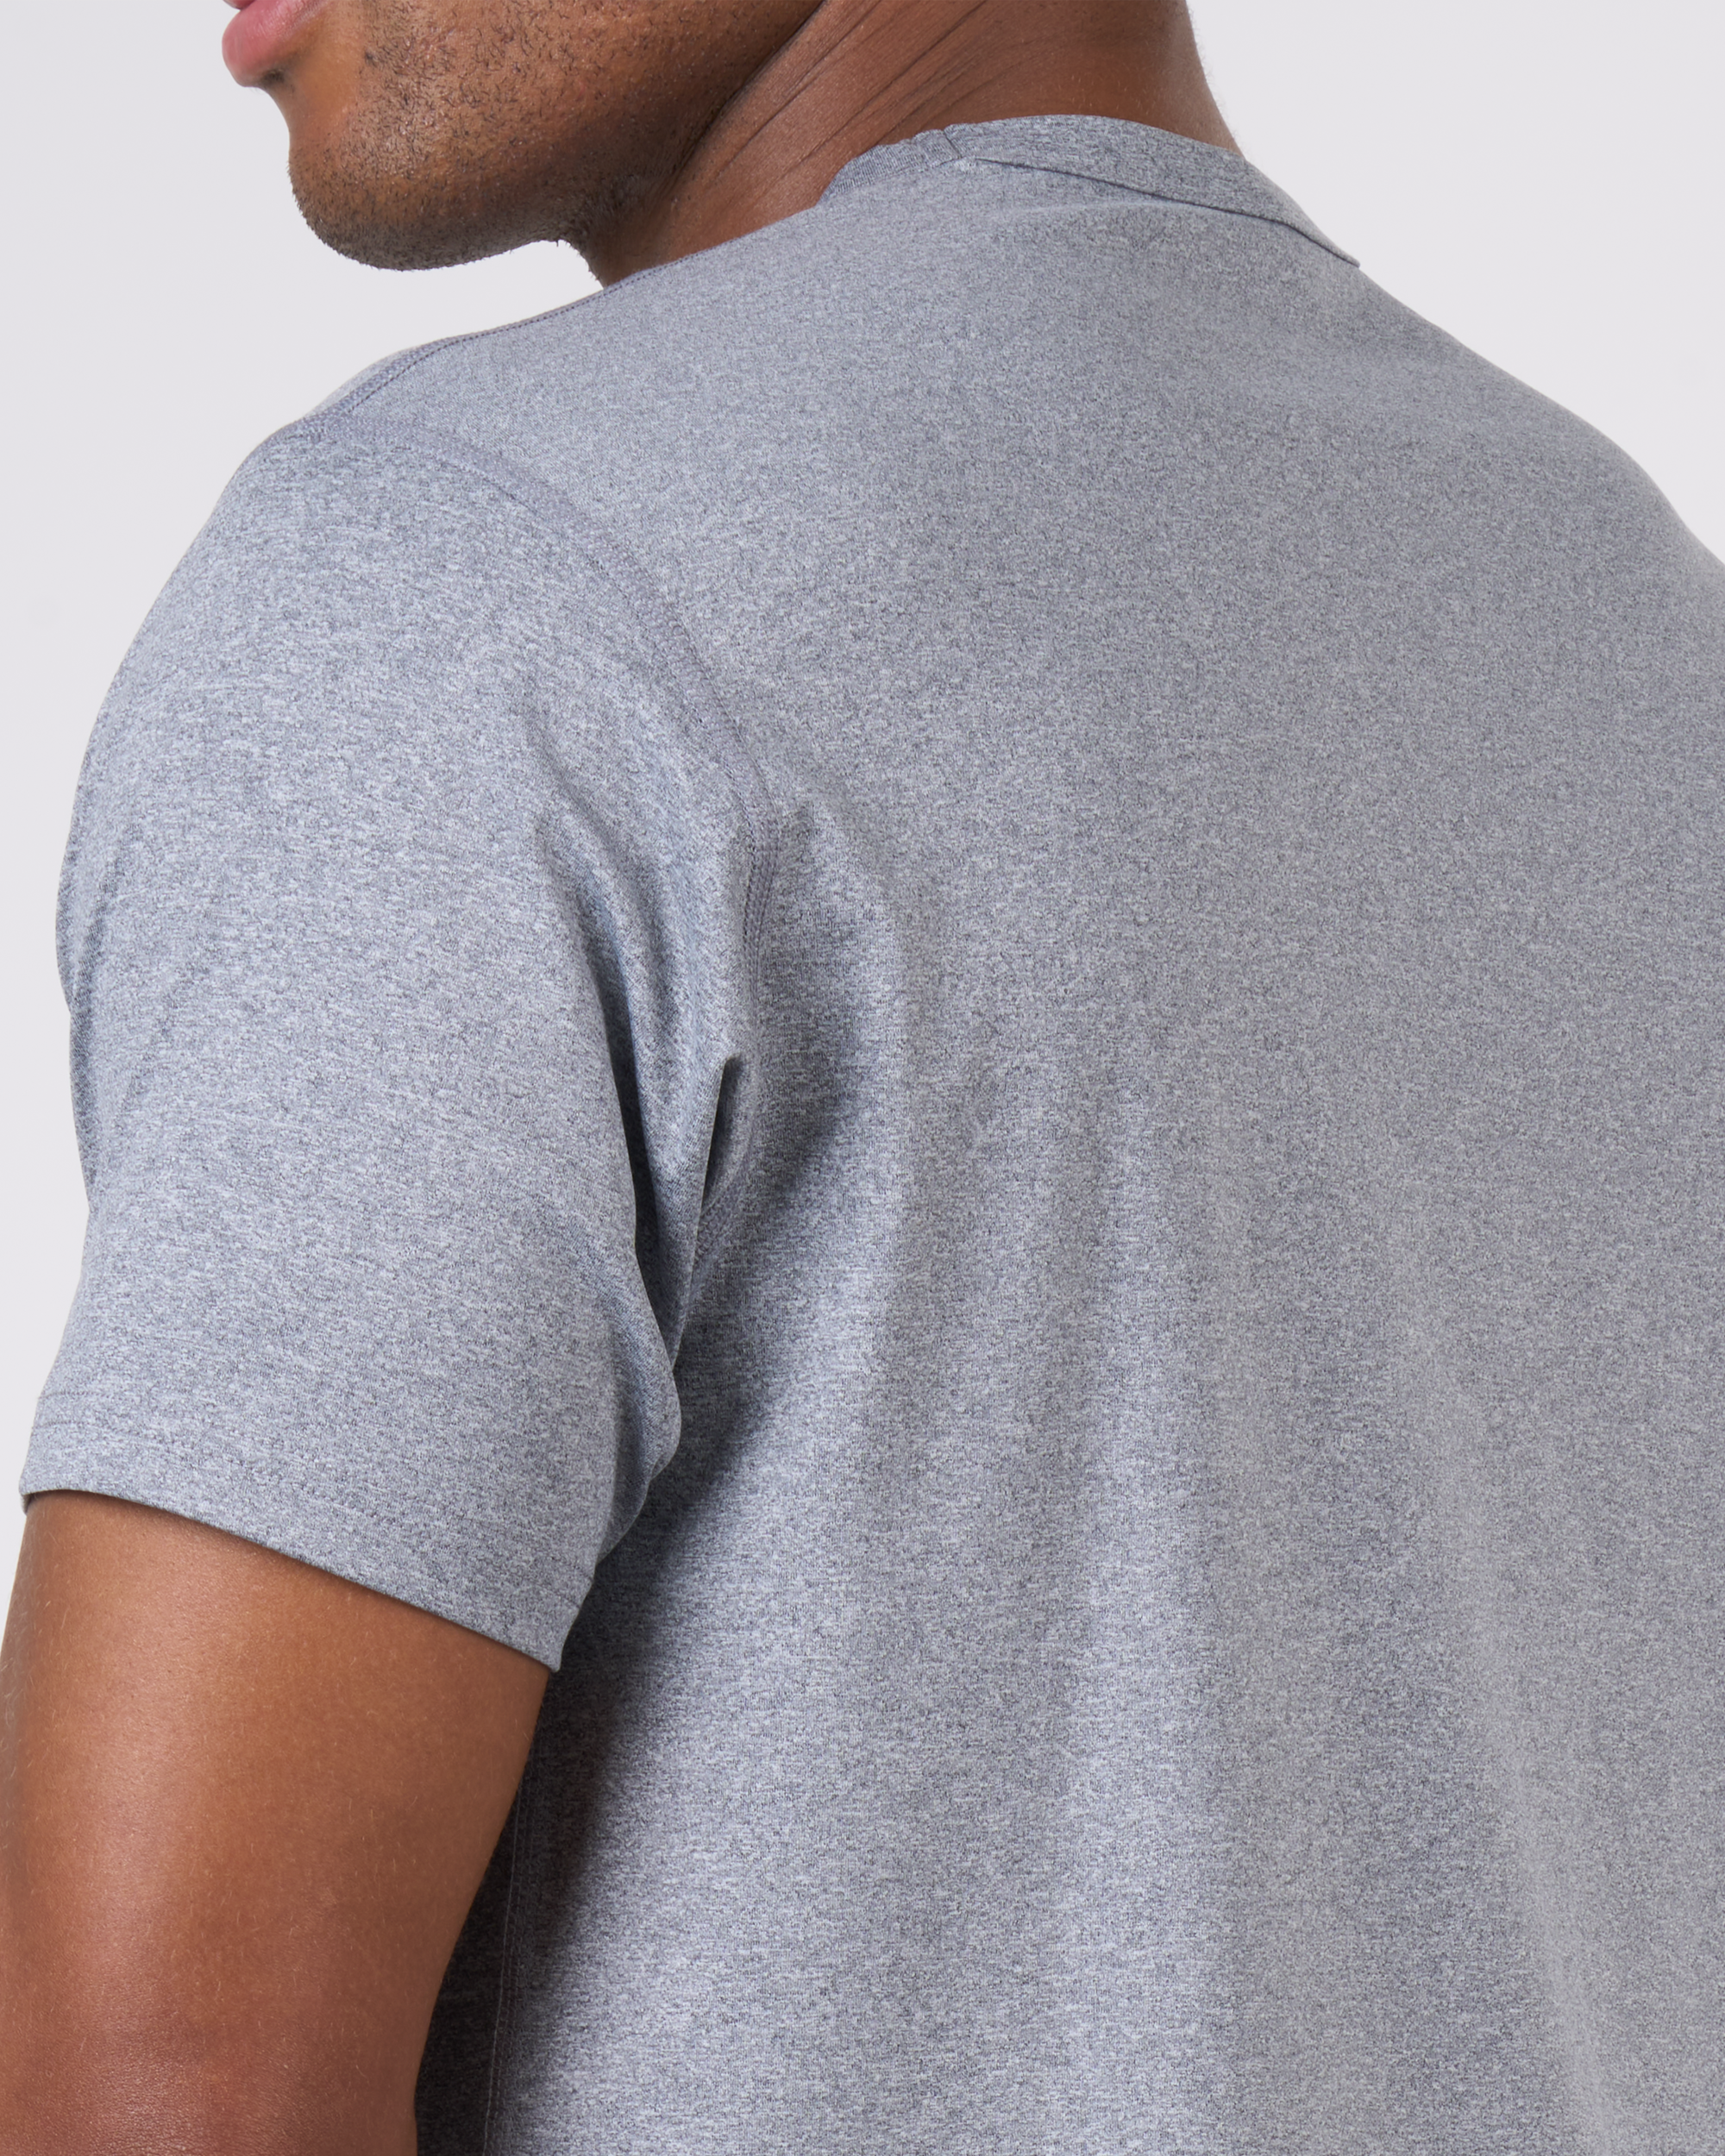 Foreign Rider Co Grey Technical Fabric Short Sleeve T-Shirt Shoulder Detail